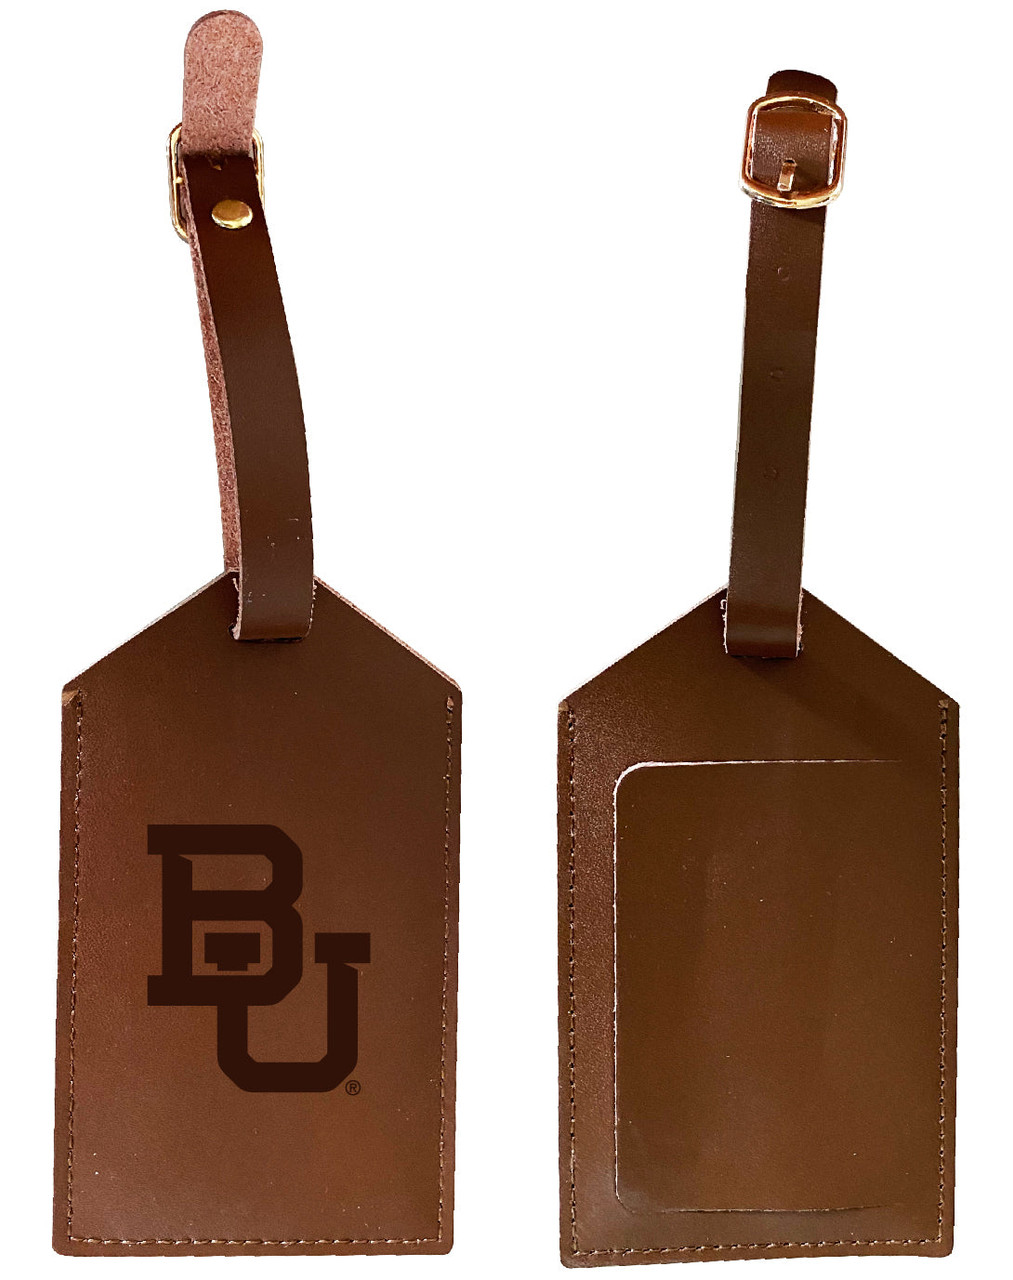 Baylor Bears Leather Luggage Tag Engraved